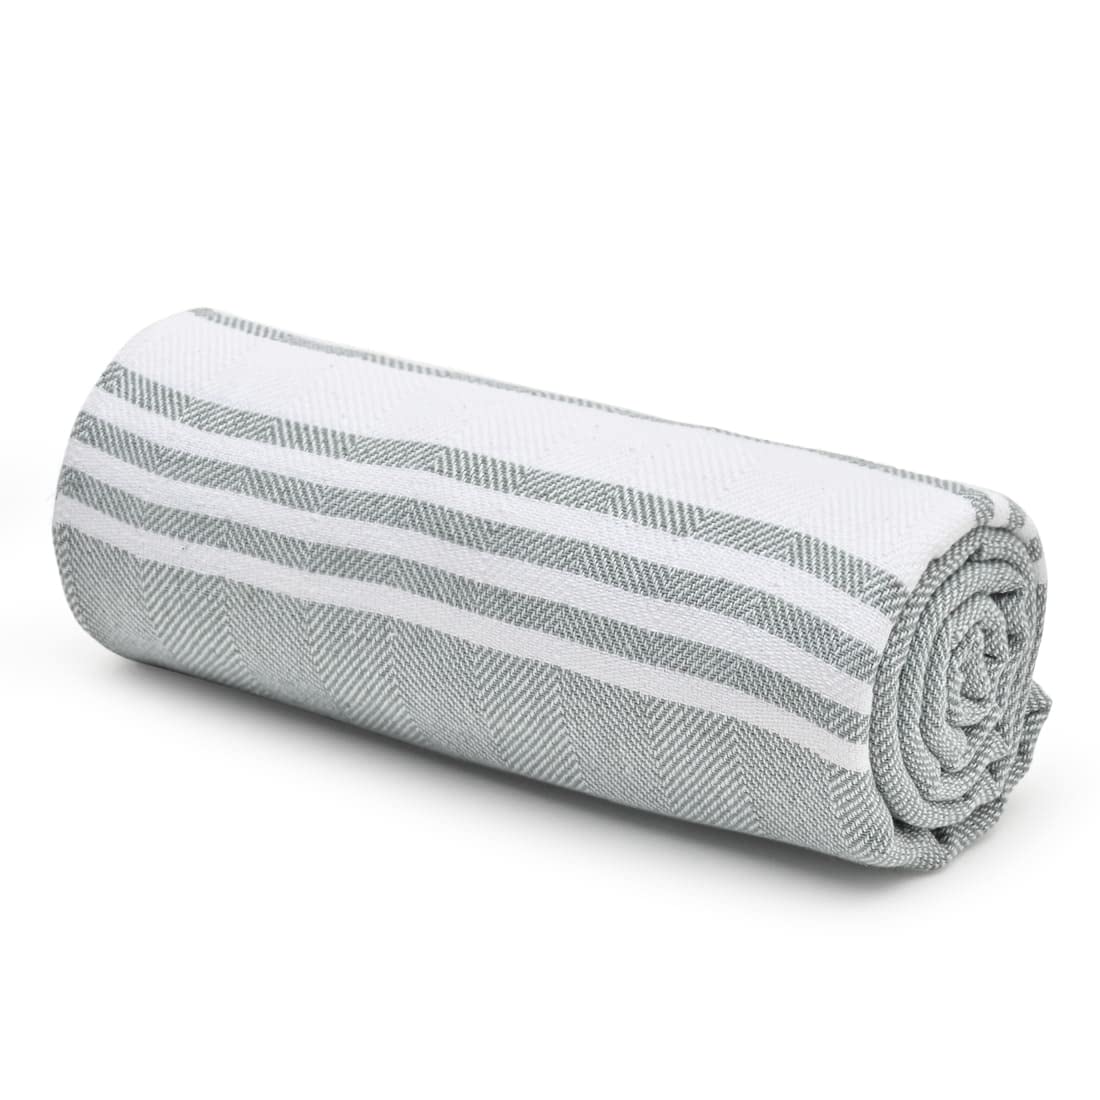 100% Cotton Turkish Bath Towel | Quick Drying Cotton Towel | Light Weight, Soft & Absorbent Turkish Towel (Pack of 1, Grey)